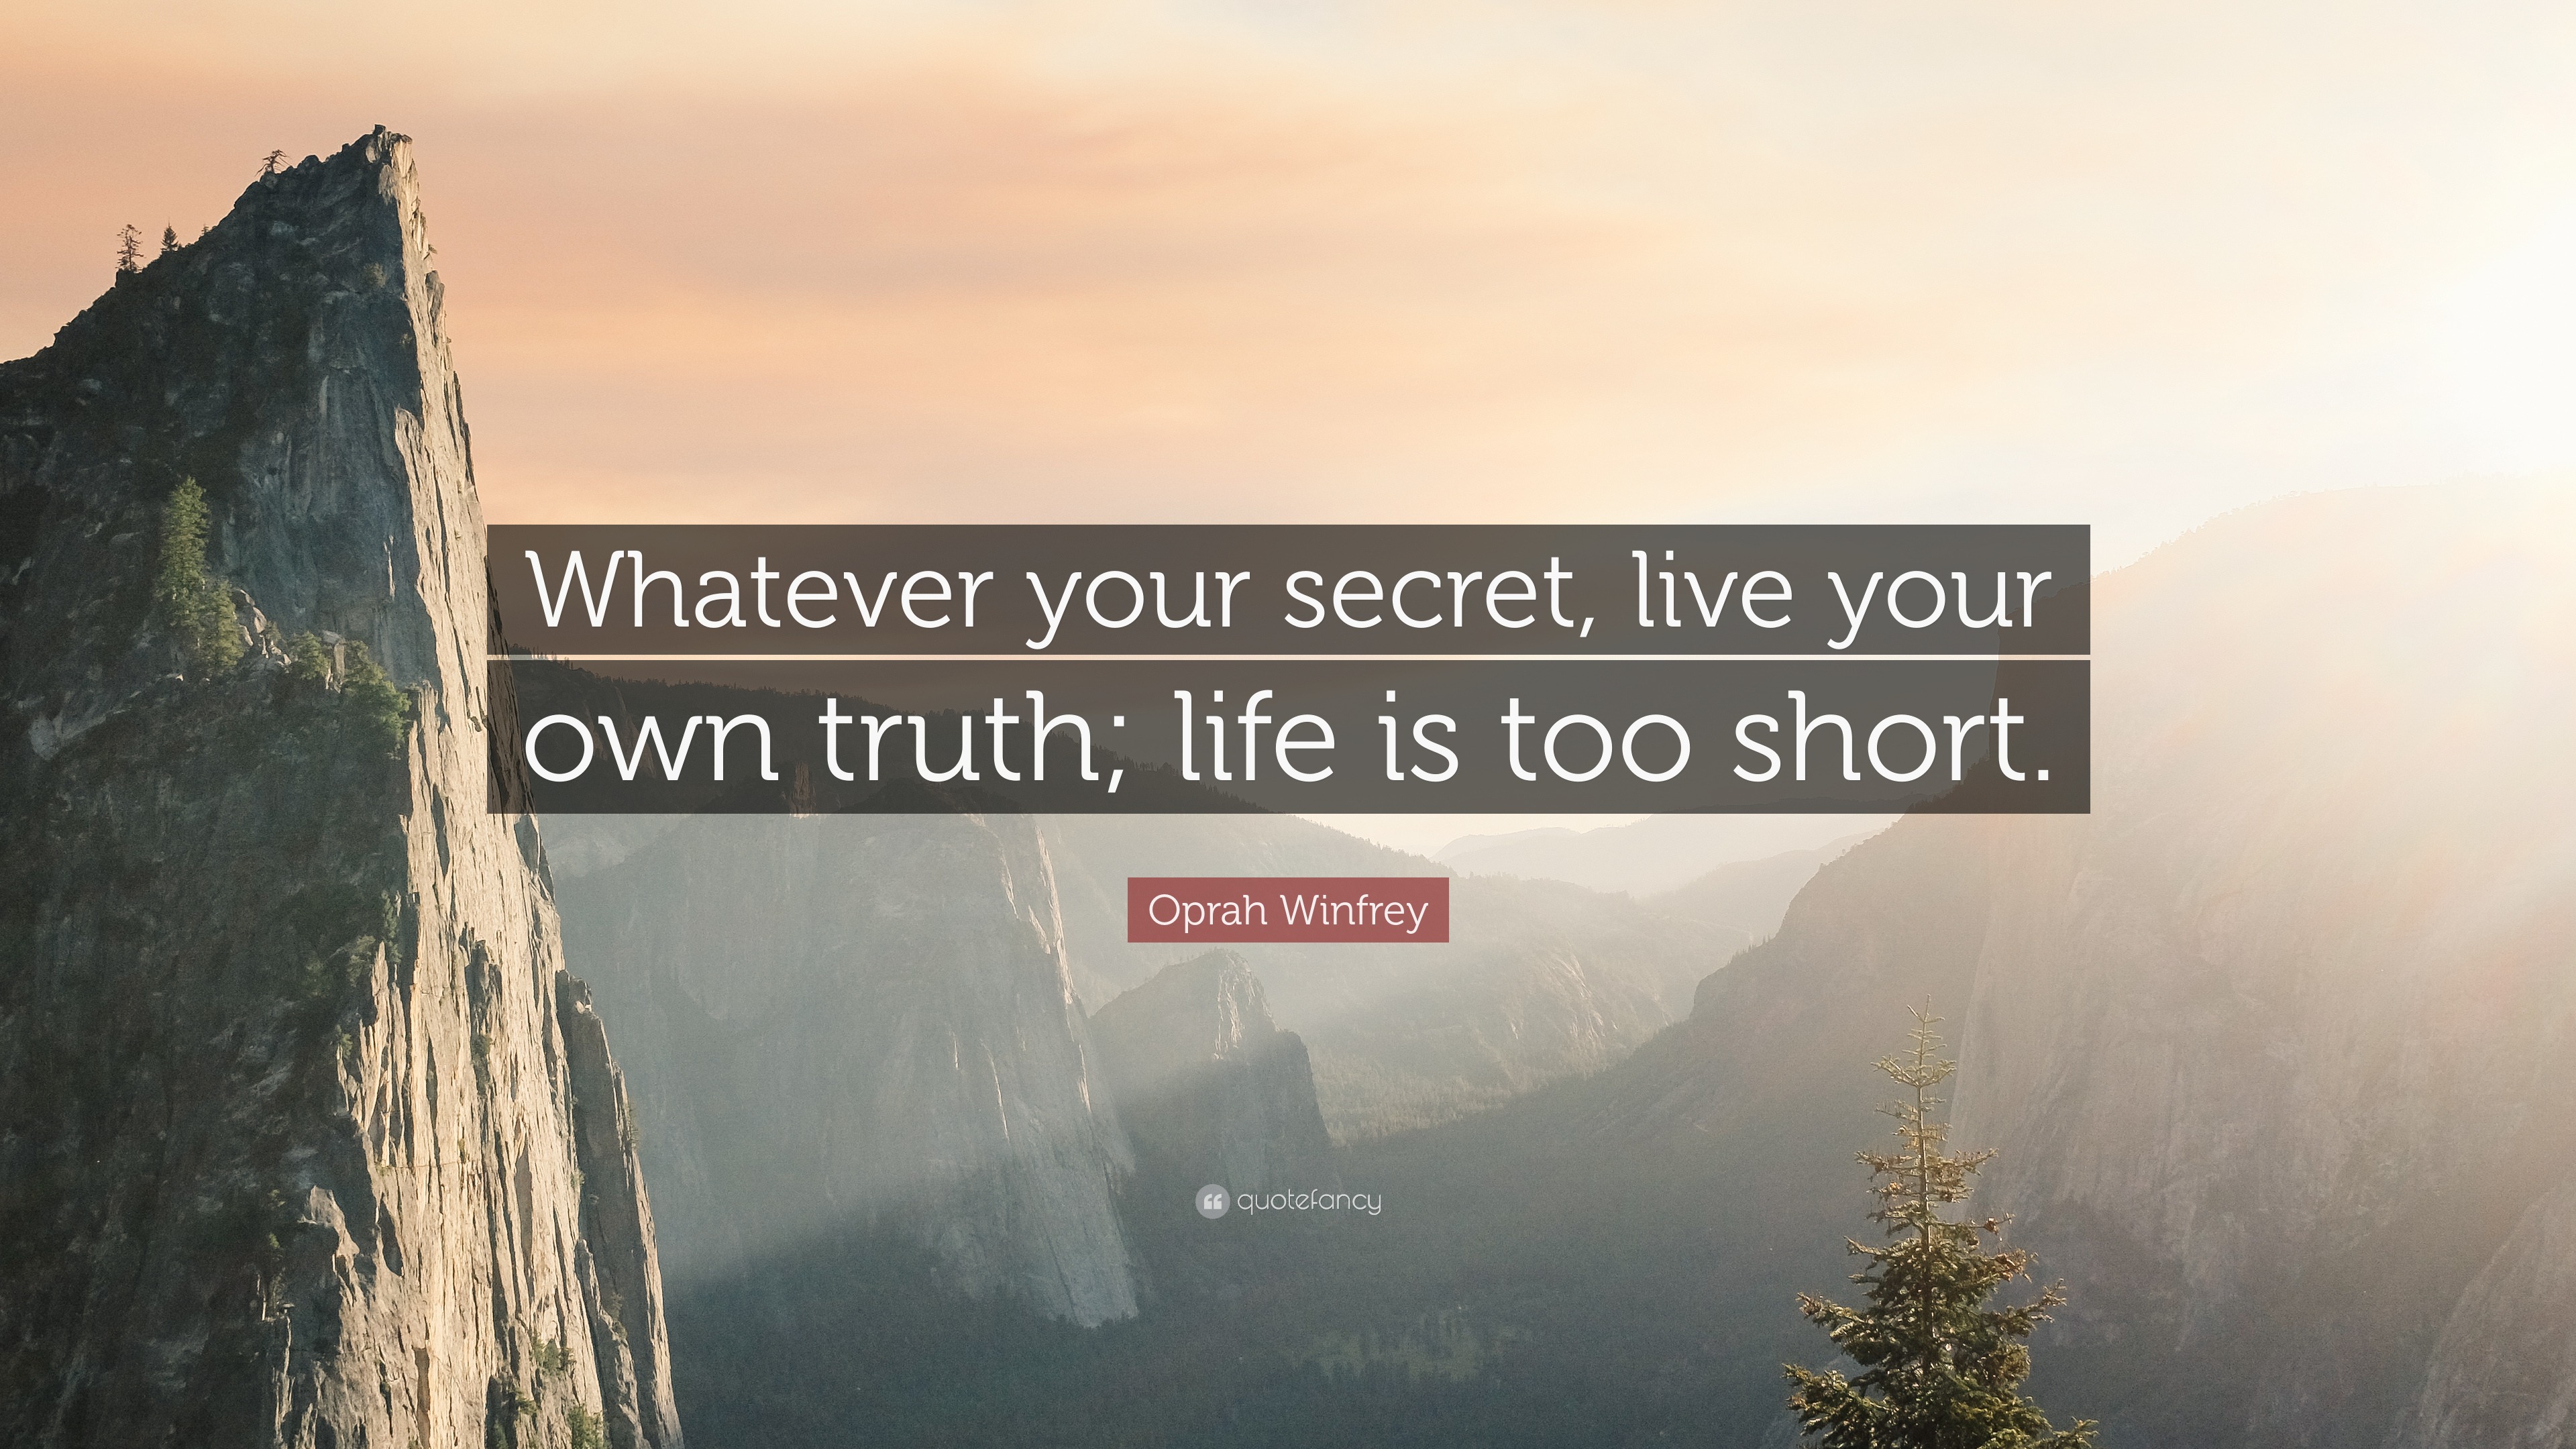 Oprah Winfrey Quote “Whatever your secret, live your own